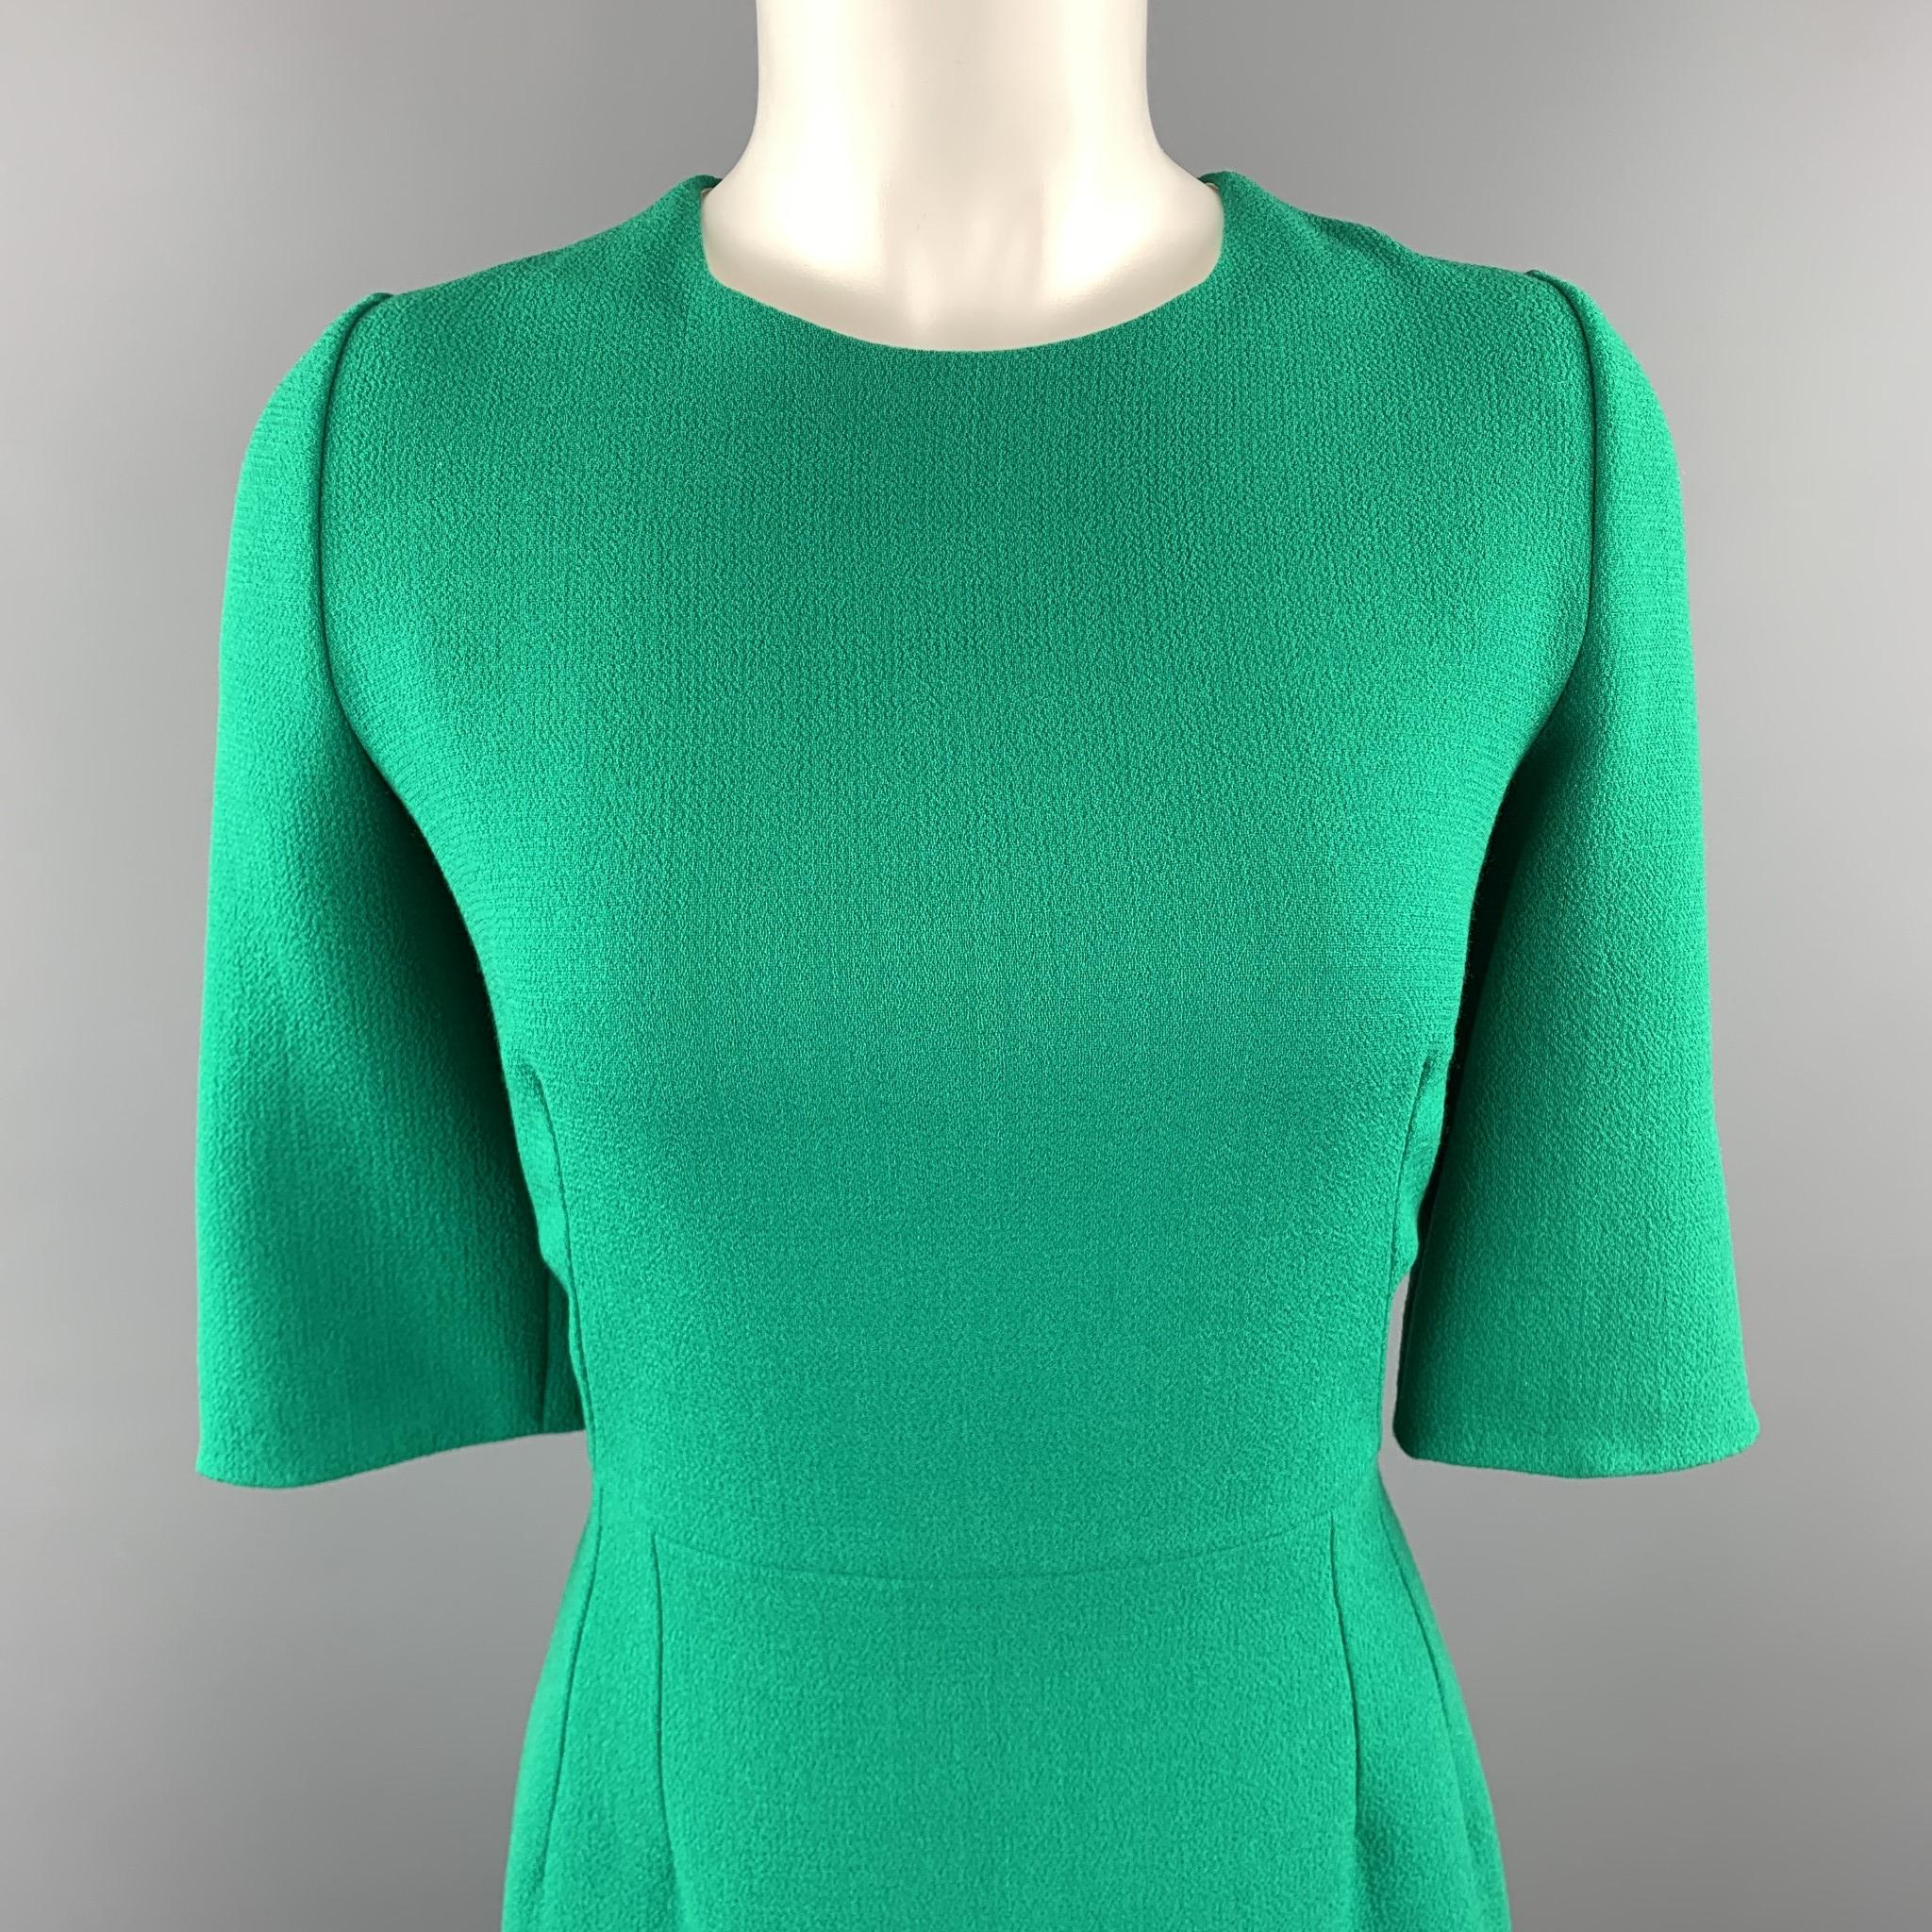 DOLCE & GABBANA shift dress comes in green wool crepe with a round neckline, three quarter sleeves, and zip closure. Made in Italy.

Excellent Pre-Owned Condition.
Marked: IT 46

Measurements:

Shoulder: 15 in.
Bust: 38 in.
Waist: 31 in.
Hip: 42